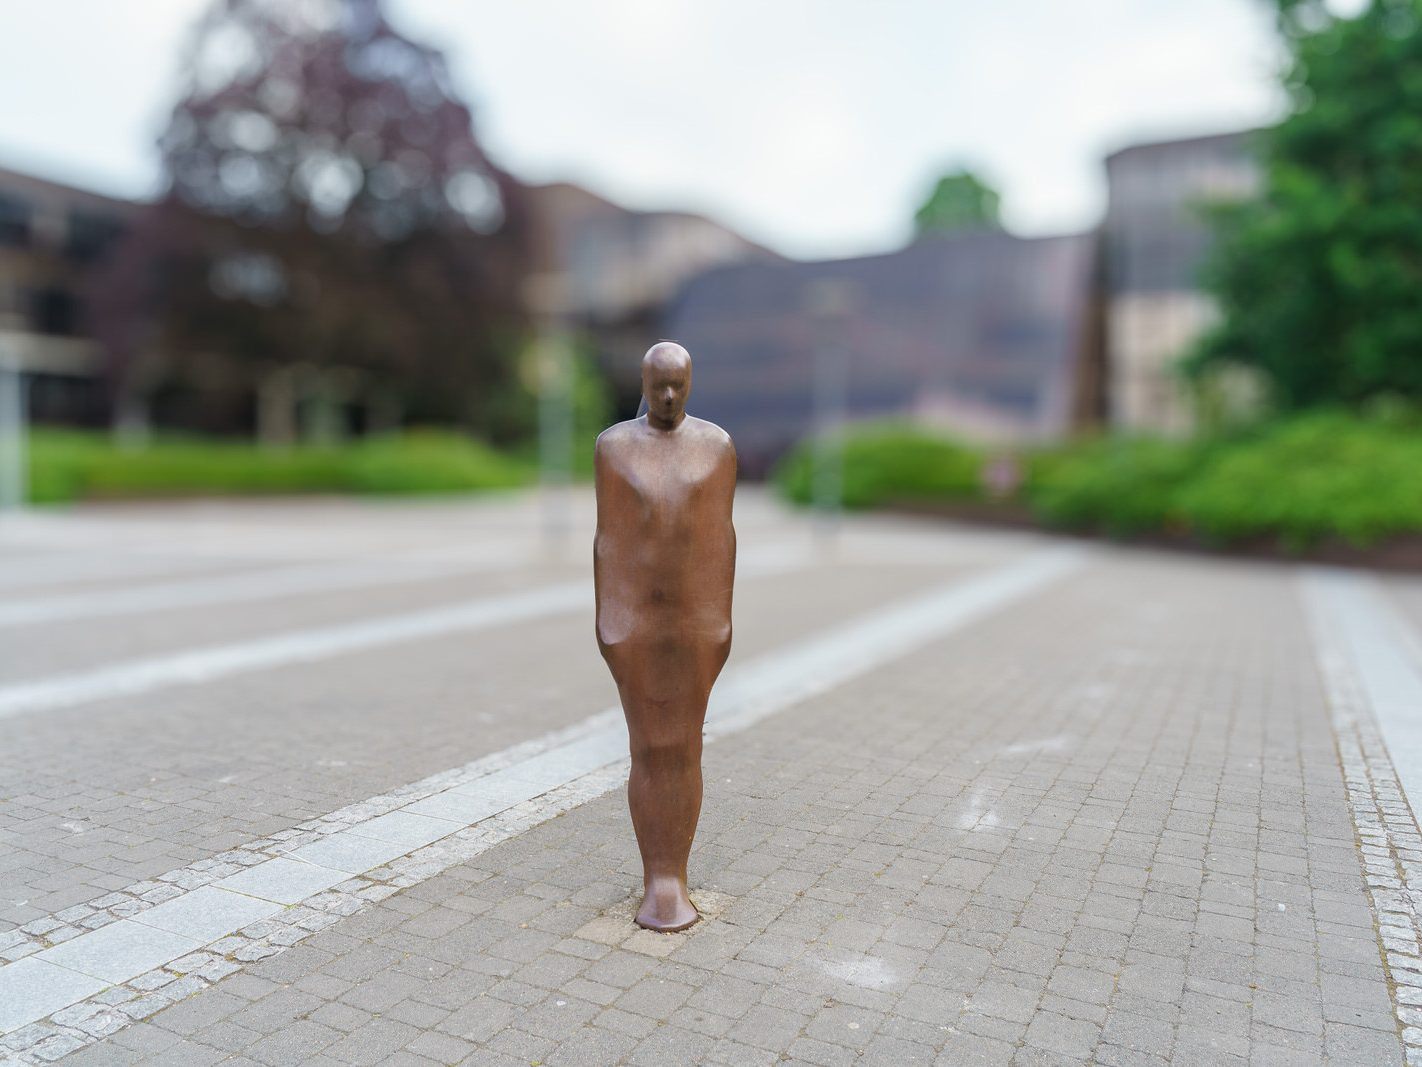 SCULPTURE BY ANTHONY GORMLEY [KNOWN AS BROWN THOMAS BY STUDENTS AT LIMERICK UNIVERSITY]-227693-1